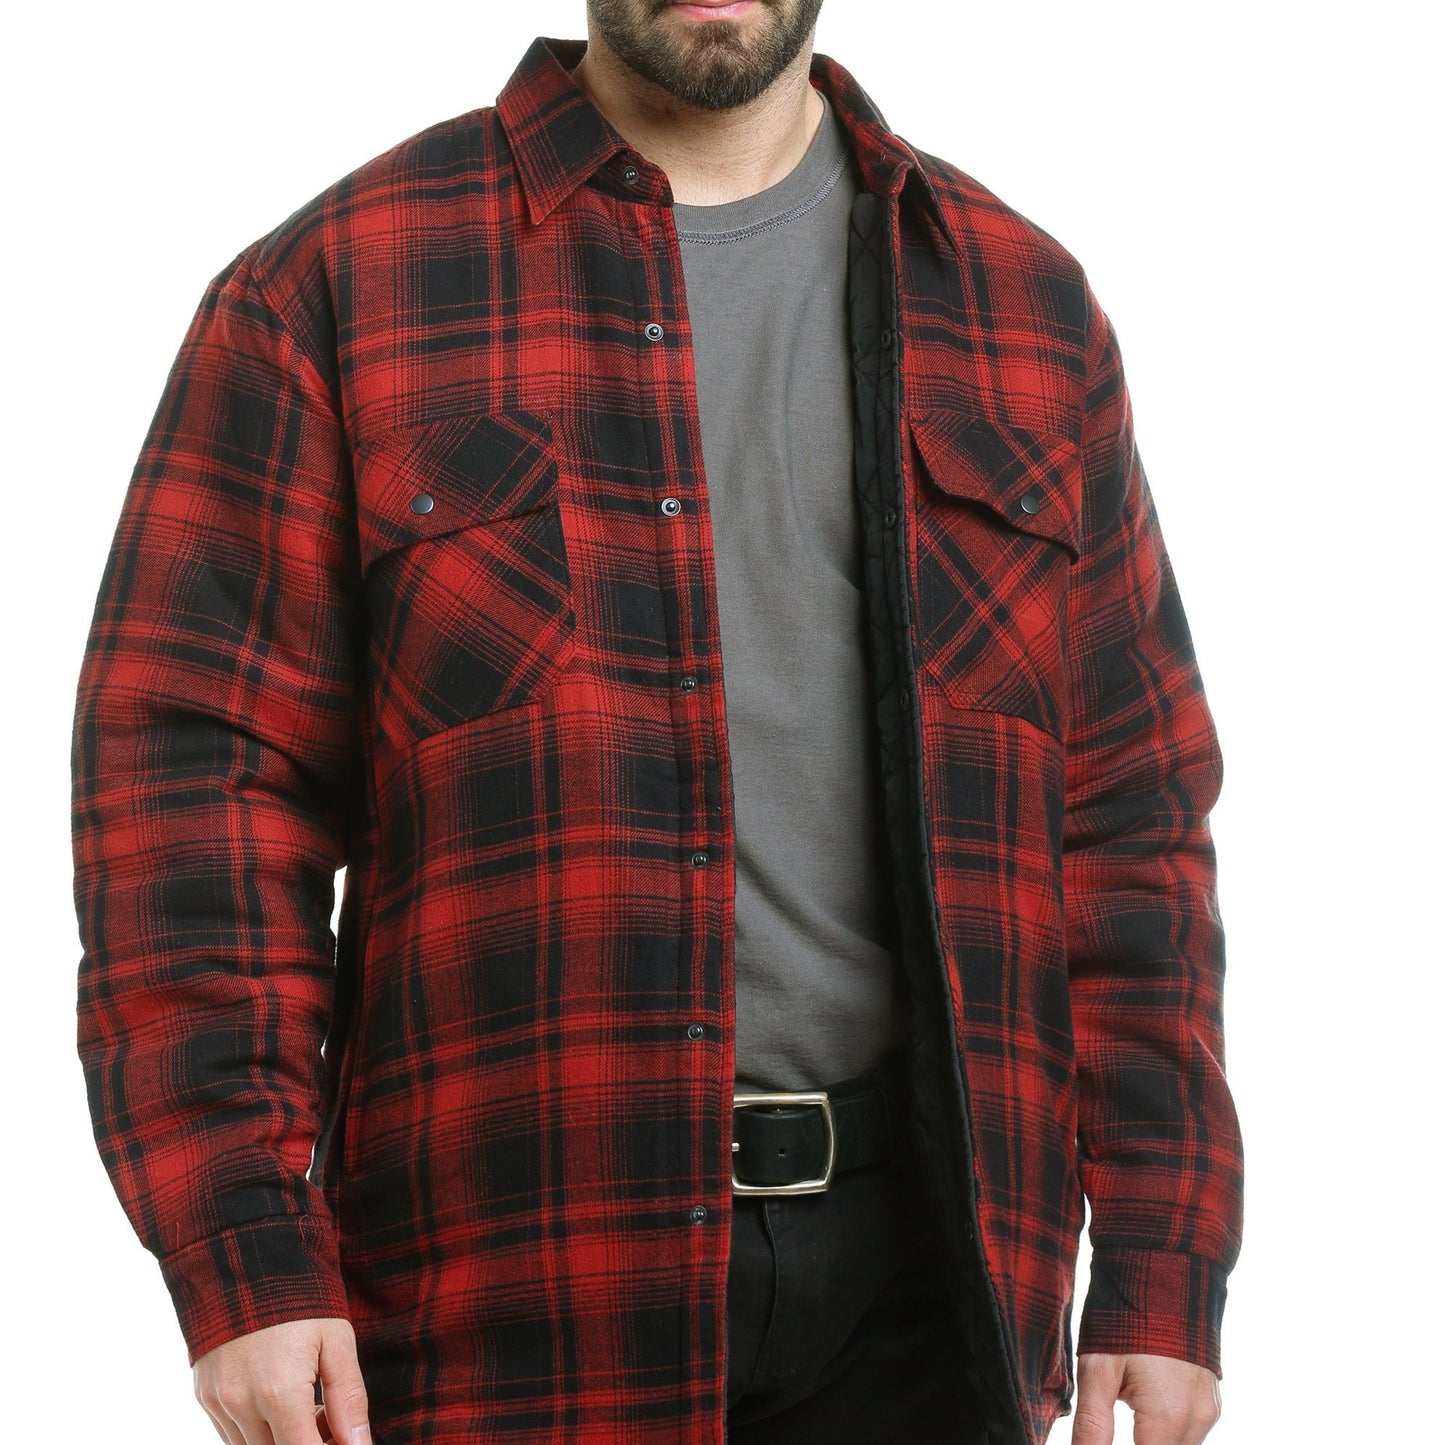 Tough Duck Quilted Flannel Shirt - WS05 - Red Plaid - model